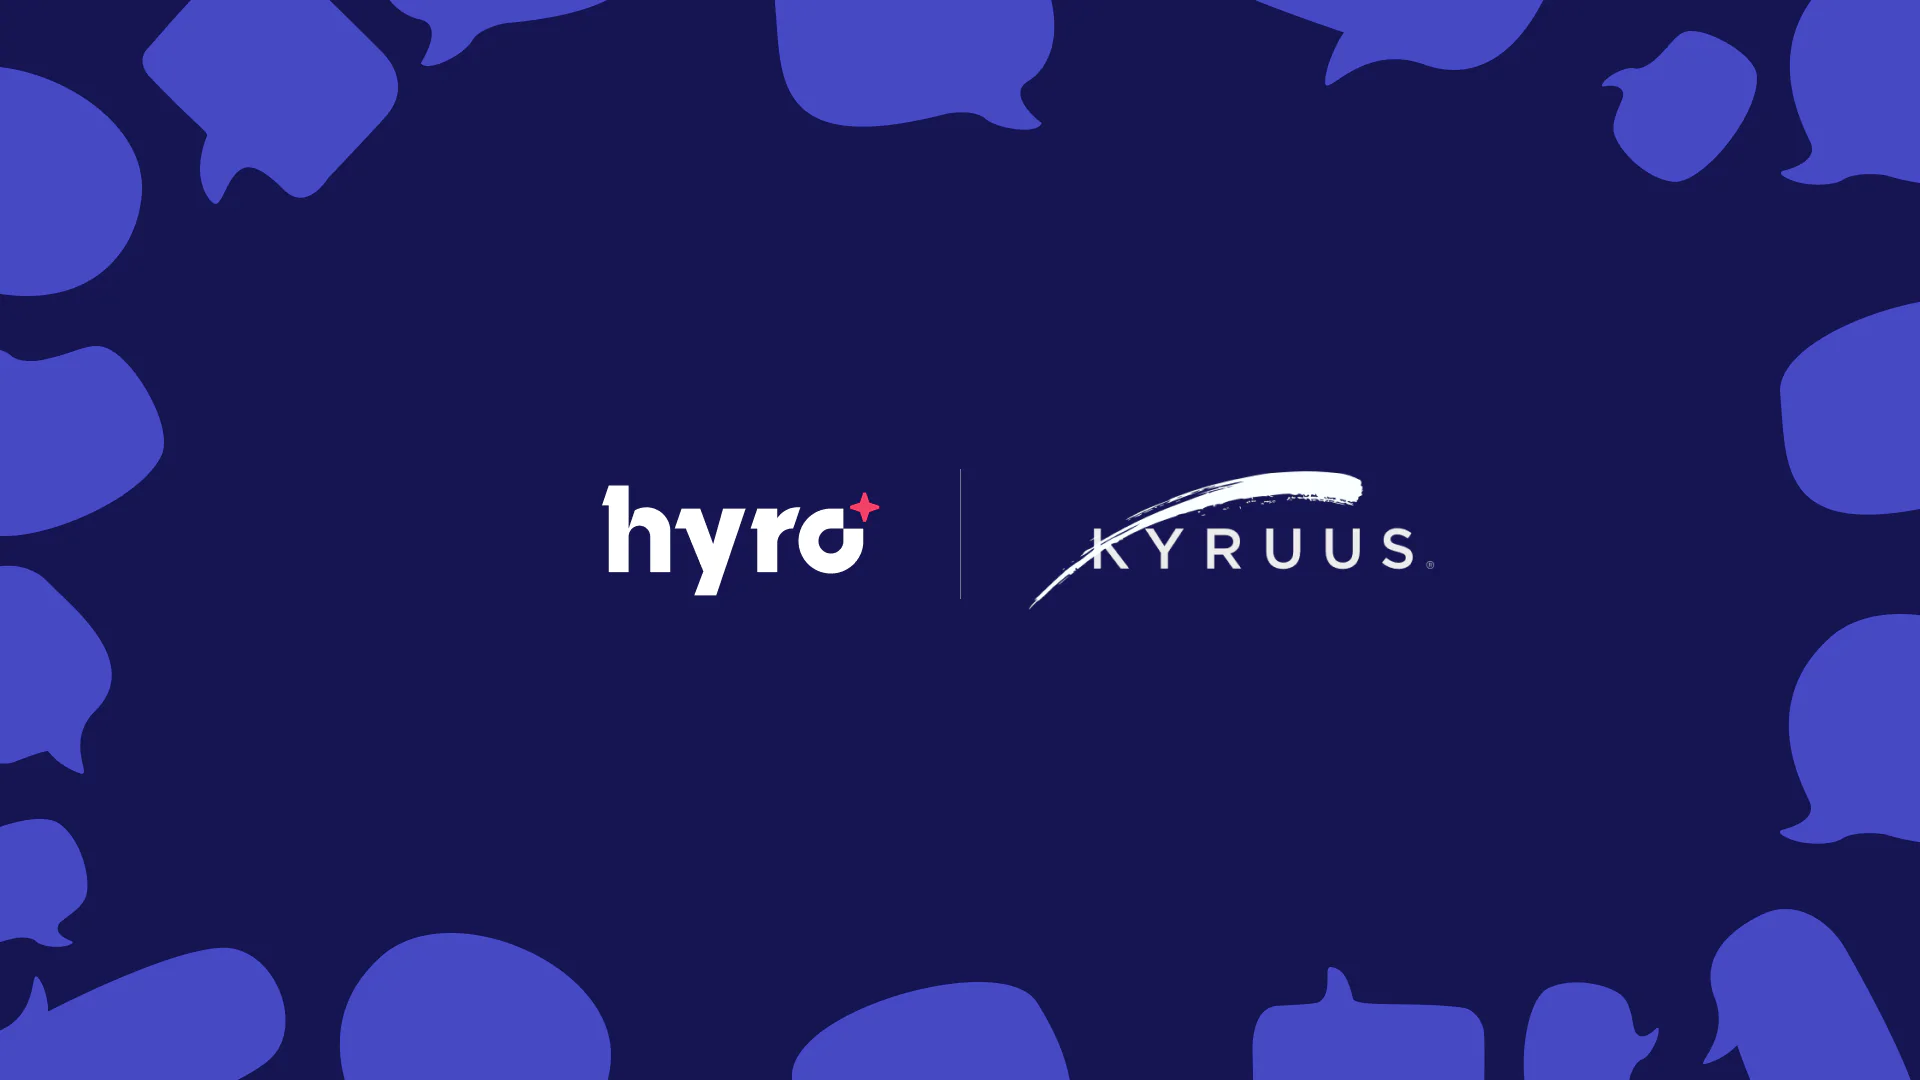 Hyro and Kyruus Partner to Help Health Systems Automate Patient Engagement and Digital Self-Service